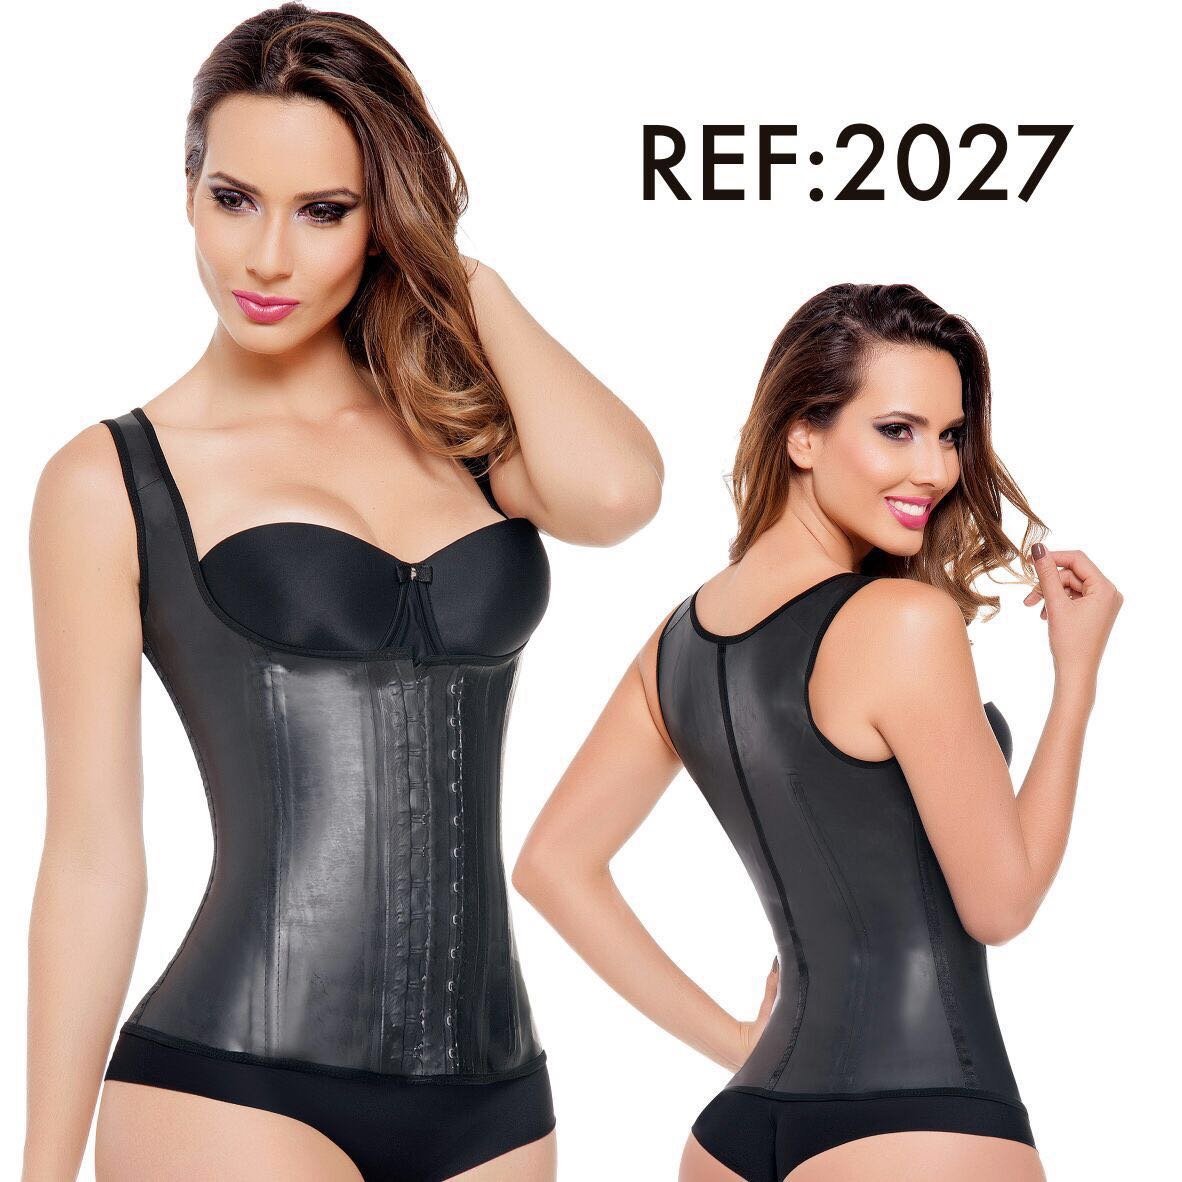 Waist Training Vest Latex Ann Michell Thick Straps 2027D Latex - BCURVED